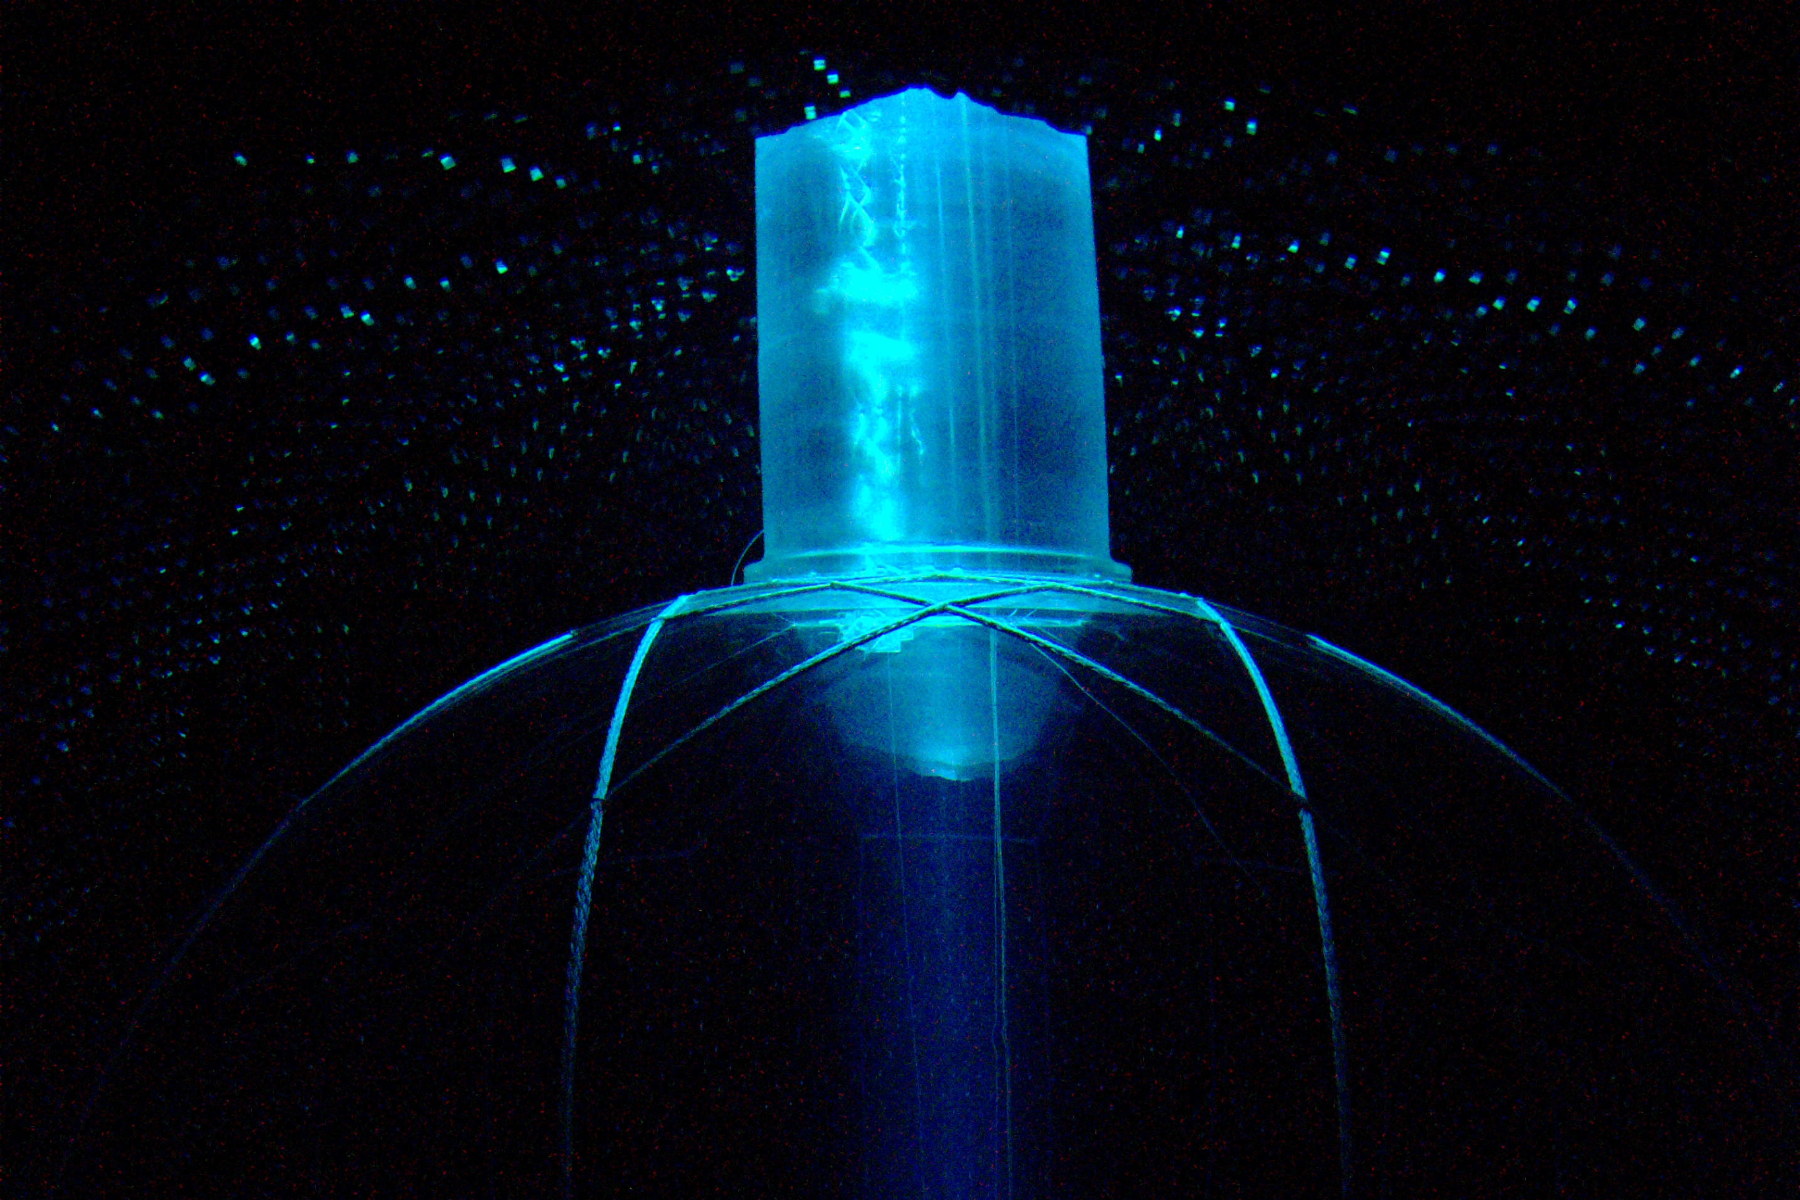 The detector consists of an active volume of 780 tonnes of liquid scintillator housed within a 12-metre diameter acrylic vessel that is held in place by ropes and viewed by an array of about 10,000 photomultiplier light detectors. In this image, taken by a camera embedded in the photomultiplier array, the detector is illuminated only by light from the clean room at the top of the vessel neck, producing a beam effect.